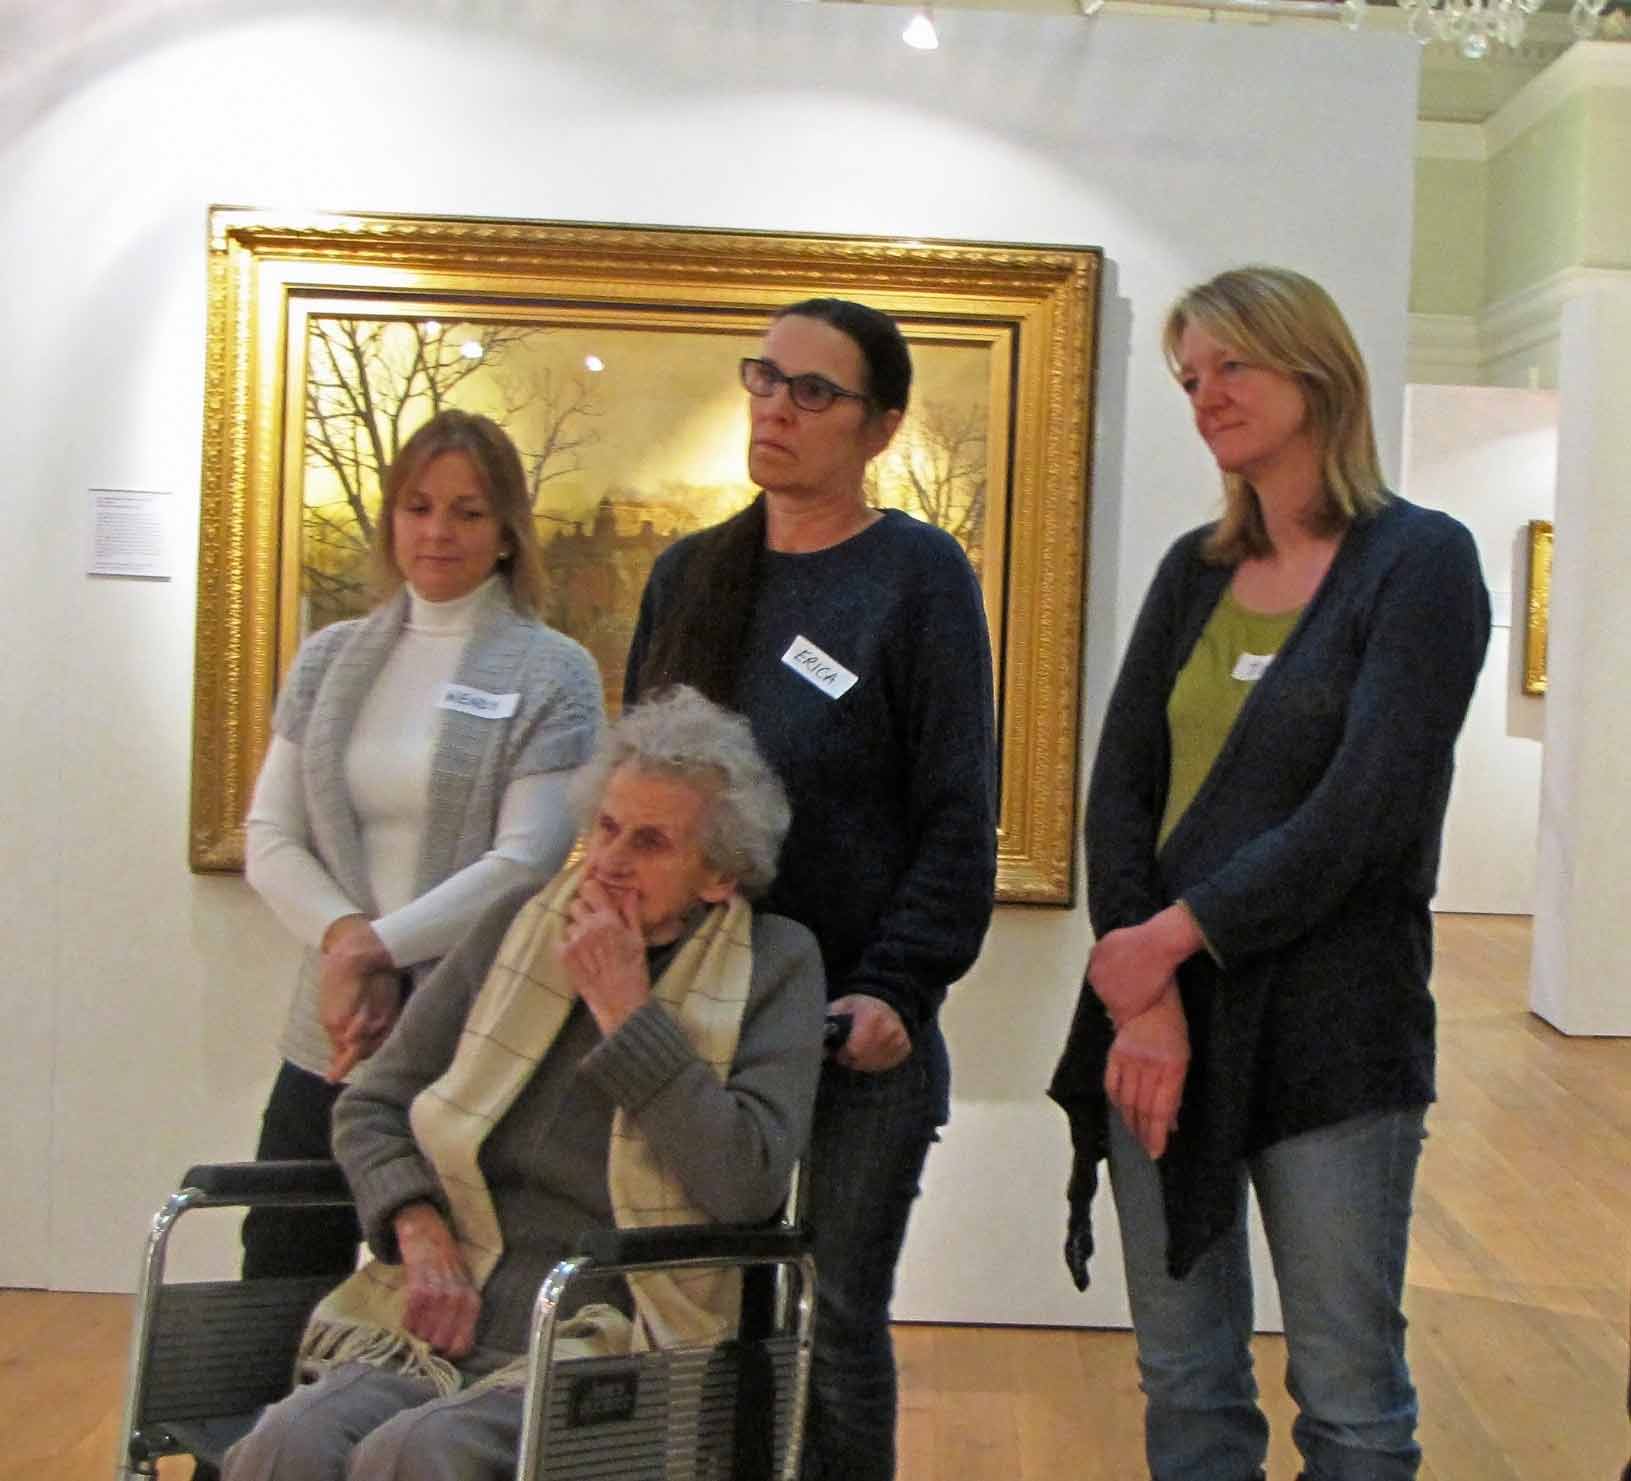 A dementia friendly session at the Mercer Art Gallery in Harrogate